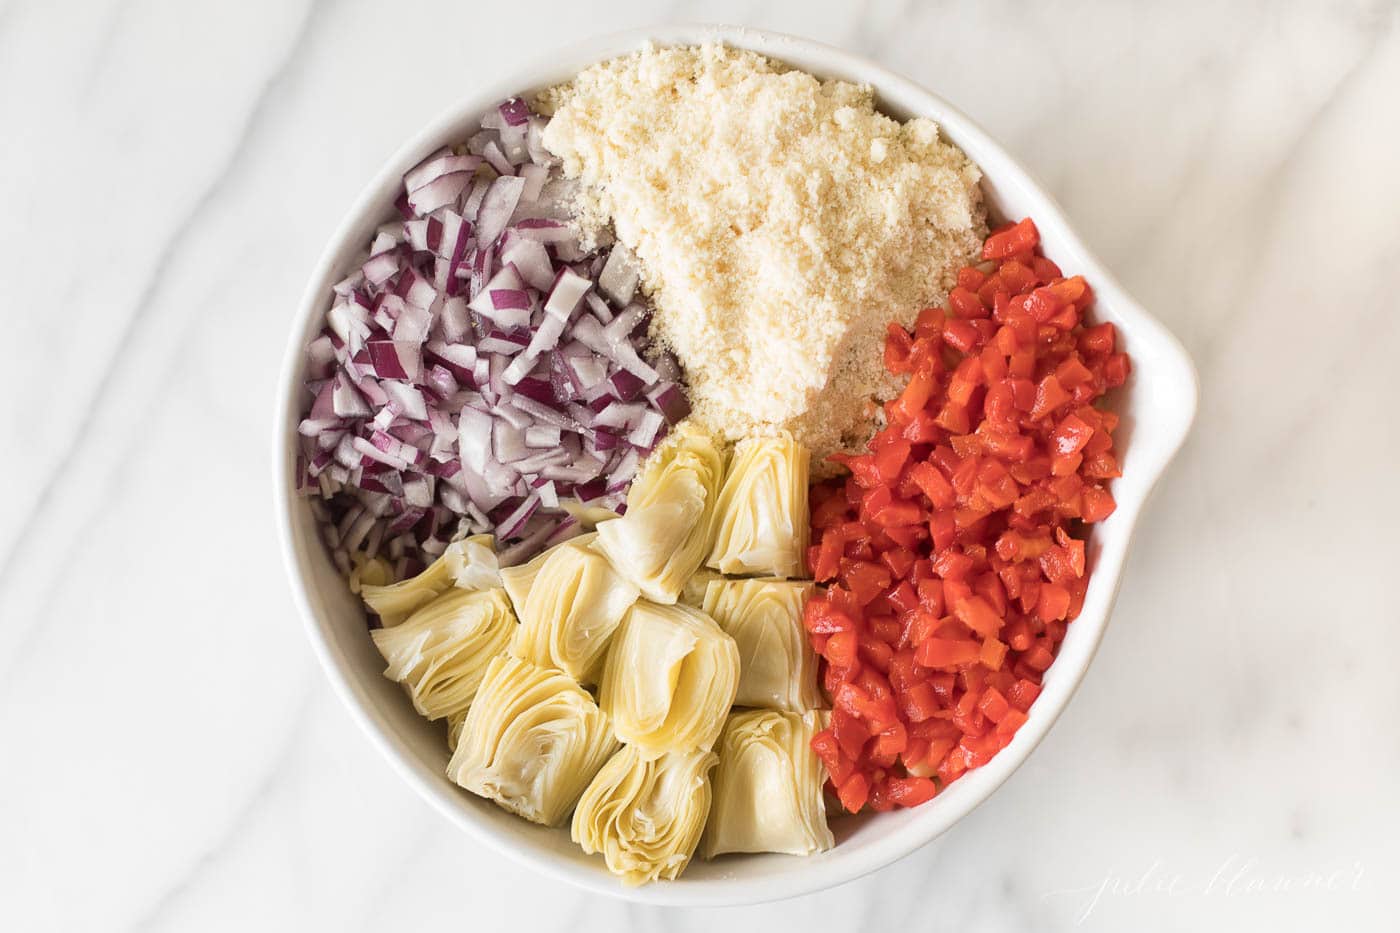 Italian pasta salad ingredients prior to being mixed in a white bowl.